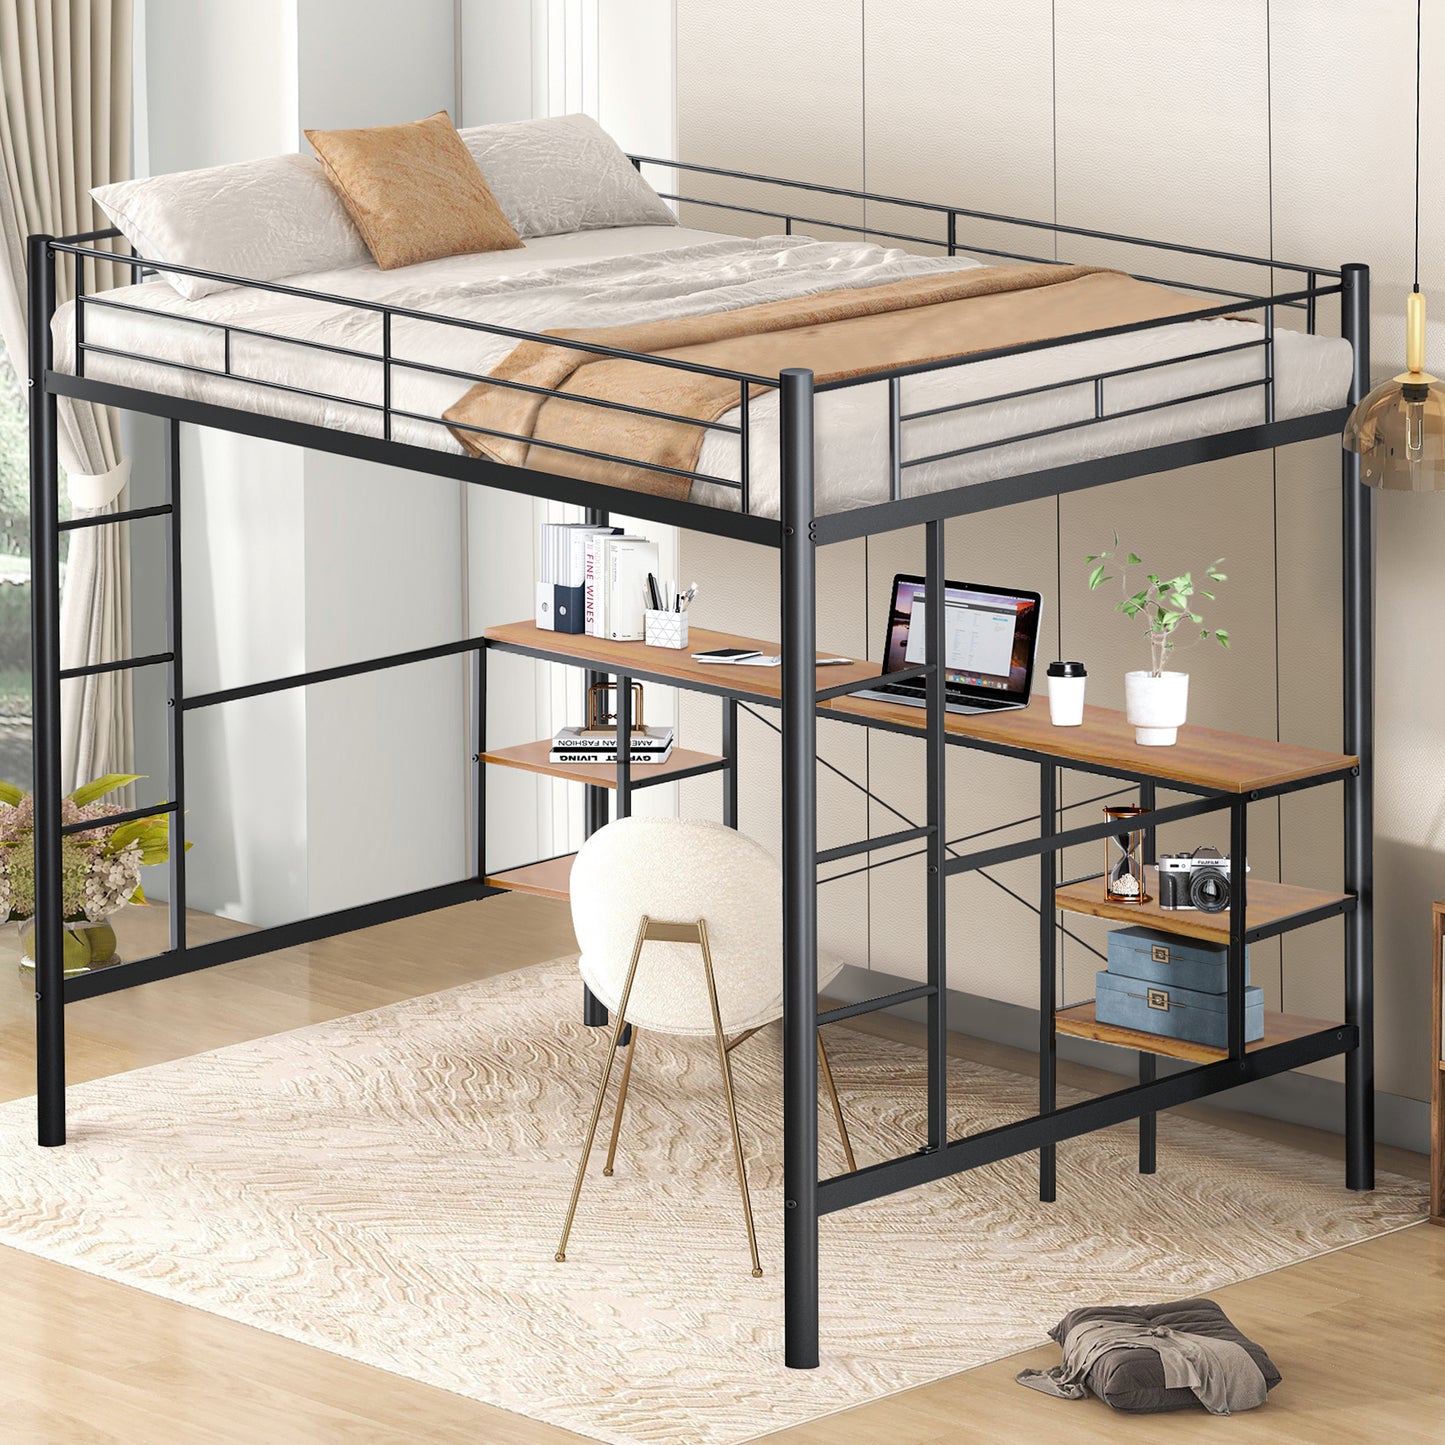 SYNGAR Twin Loft Bed with Desk, Metal Loft Bed with 4 Storage Shelves, Space-Saving Bed Frame with Bilateral Ladders and Safety Guard Rails for Boys Girls Kids Teens Adults, Black